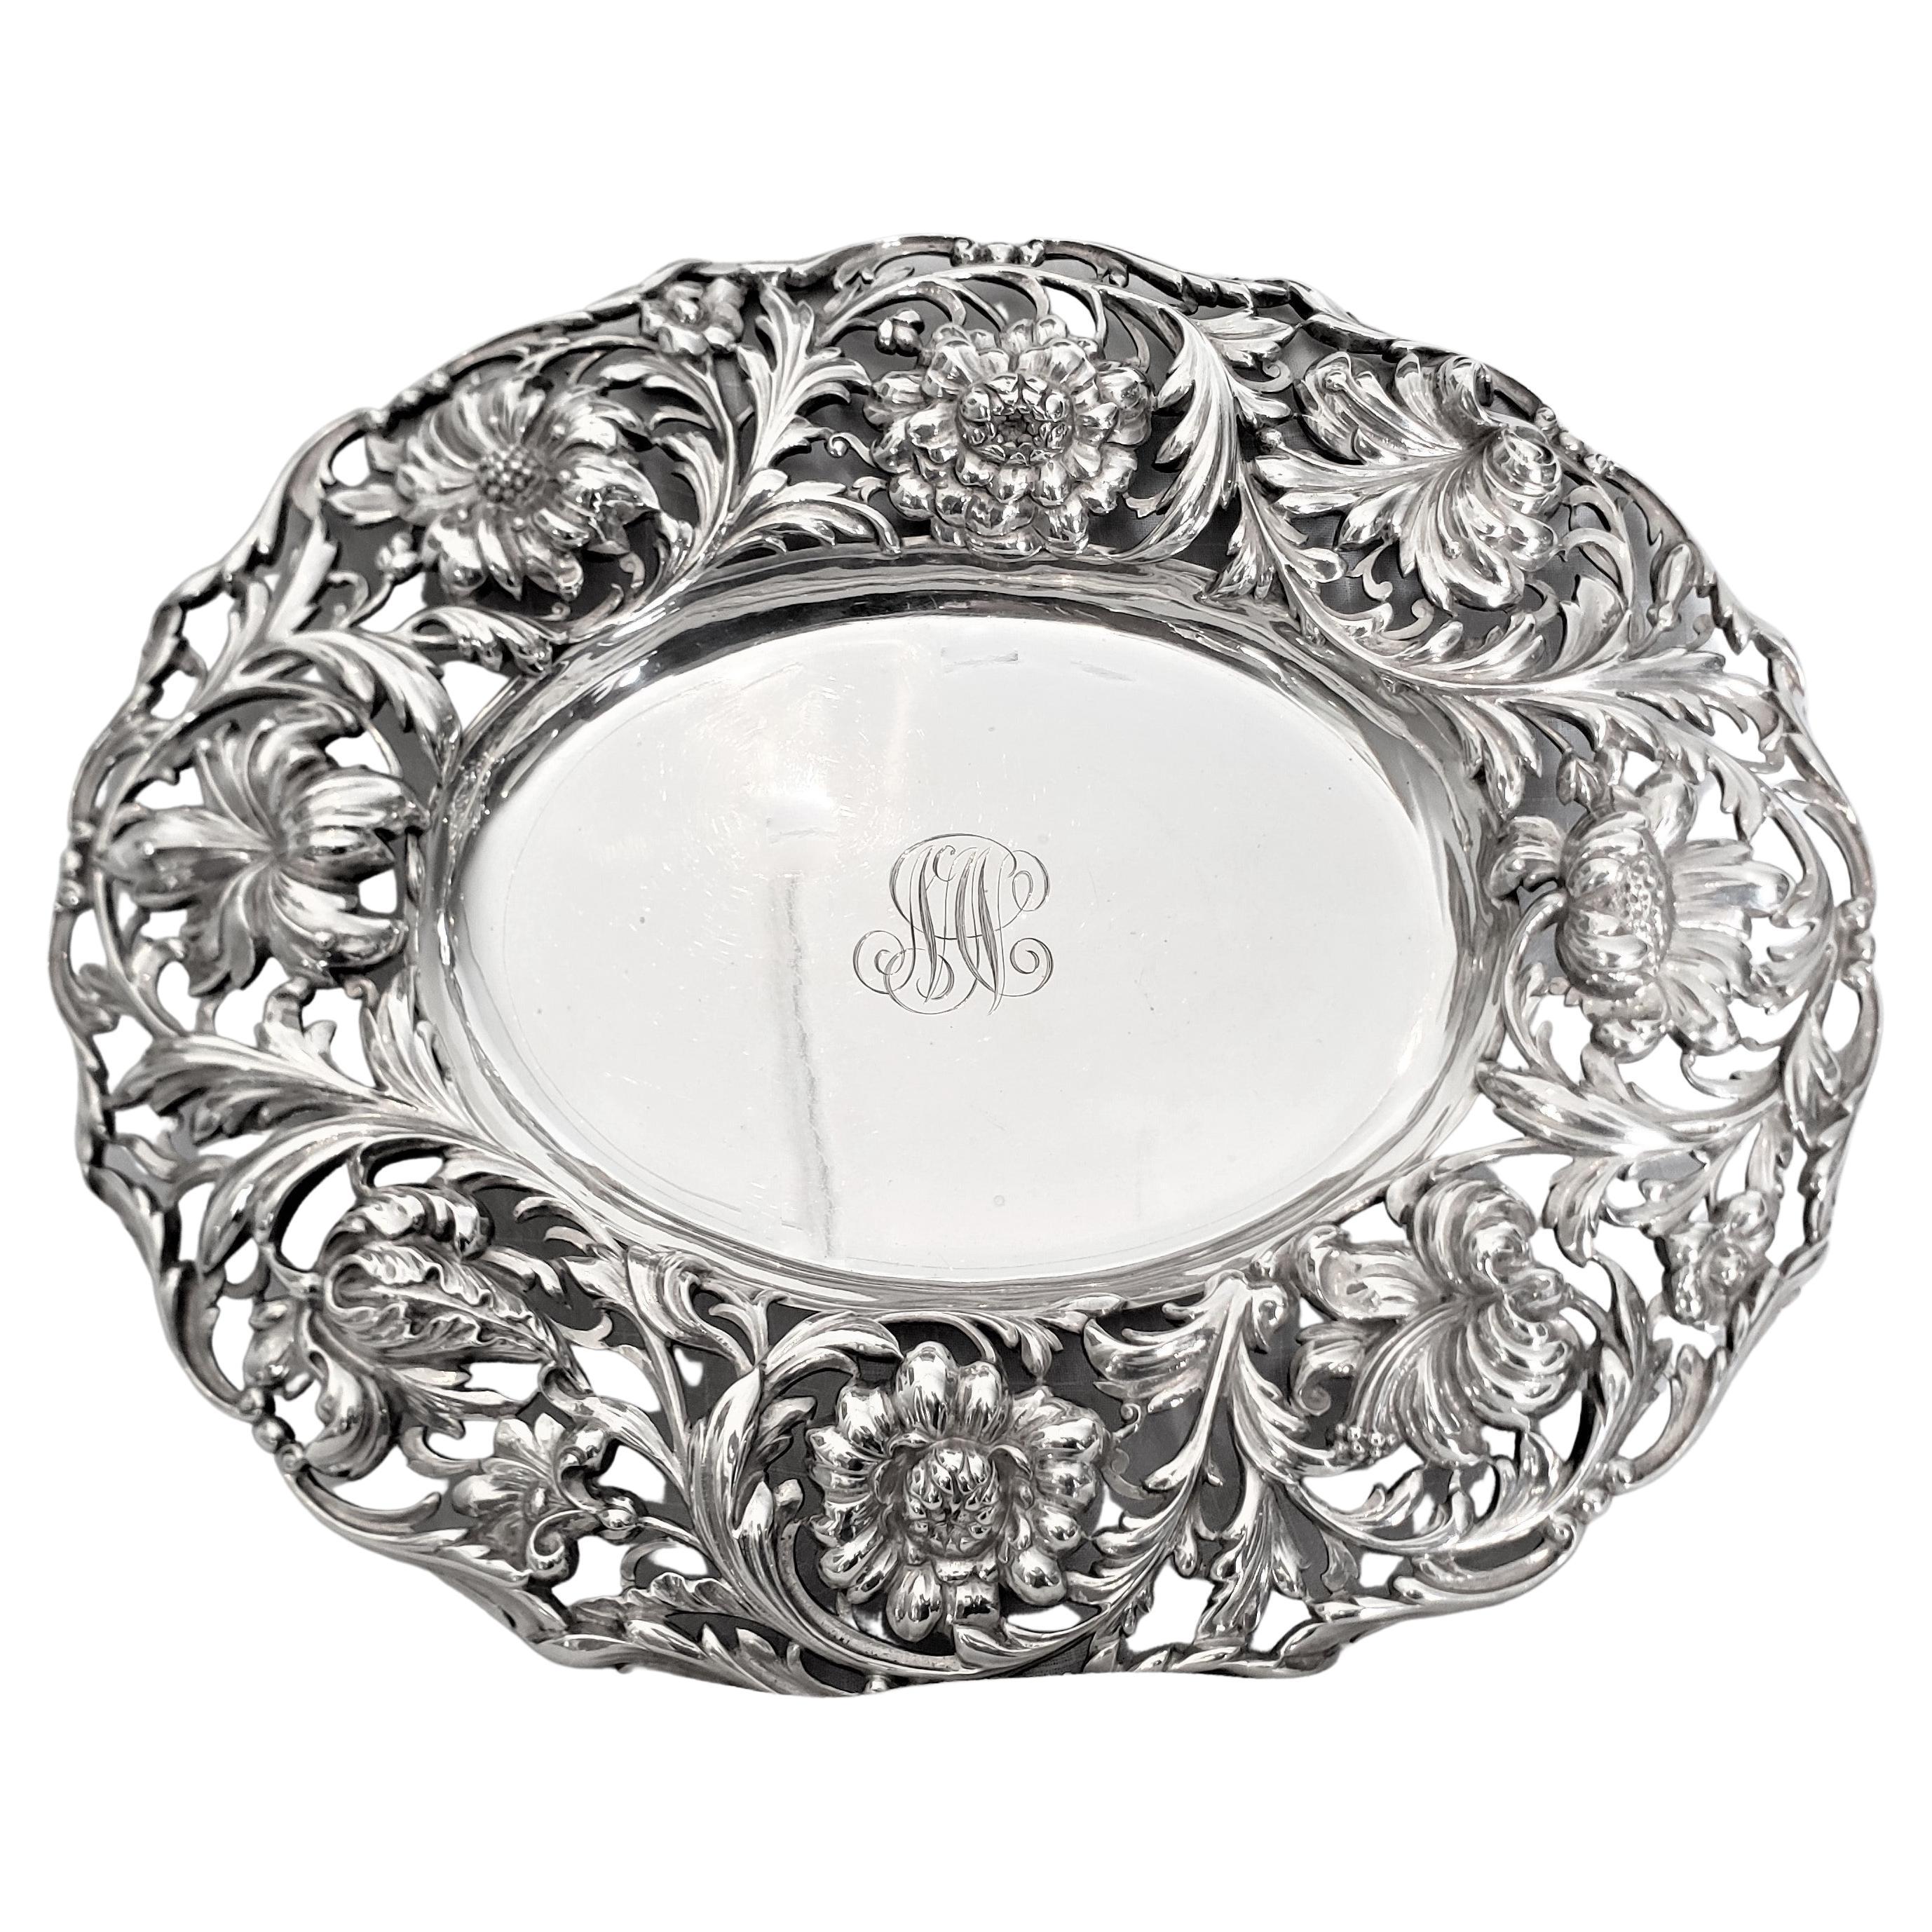 Antique Signed Tiffany & Co. Sterling Silver Serving Dish with Floral Decoration For Sale